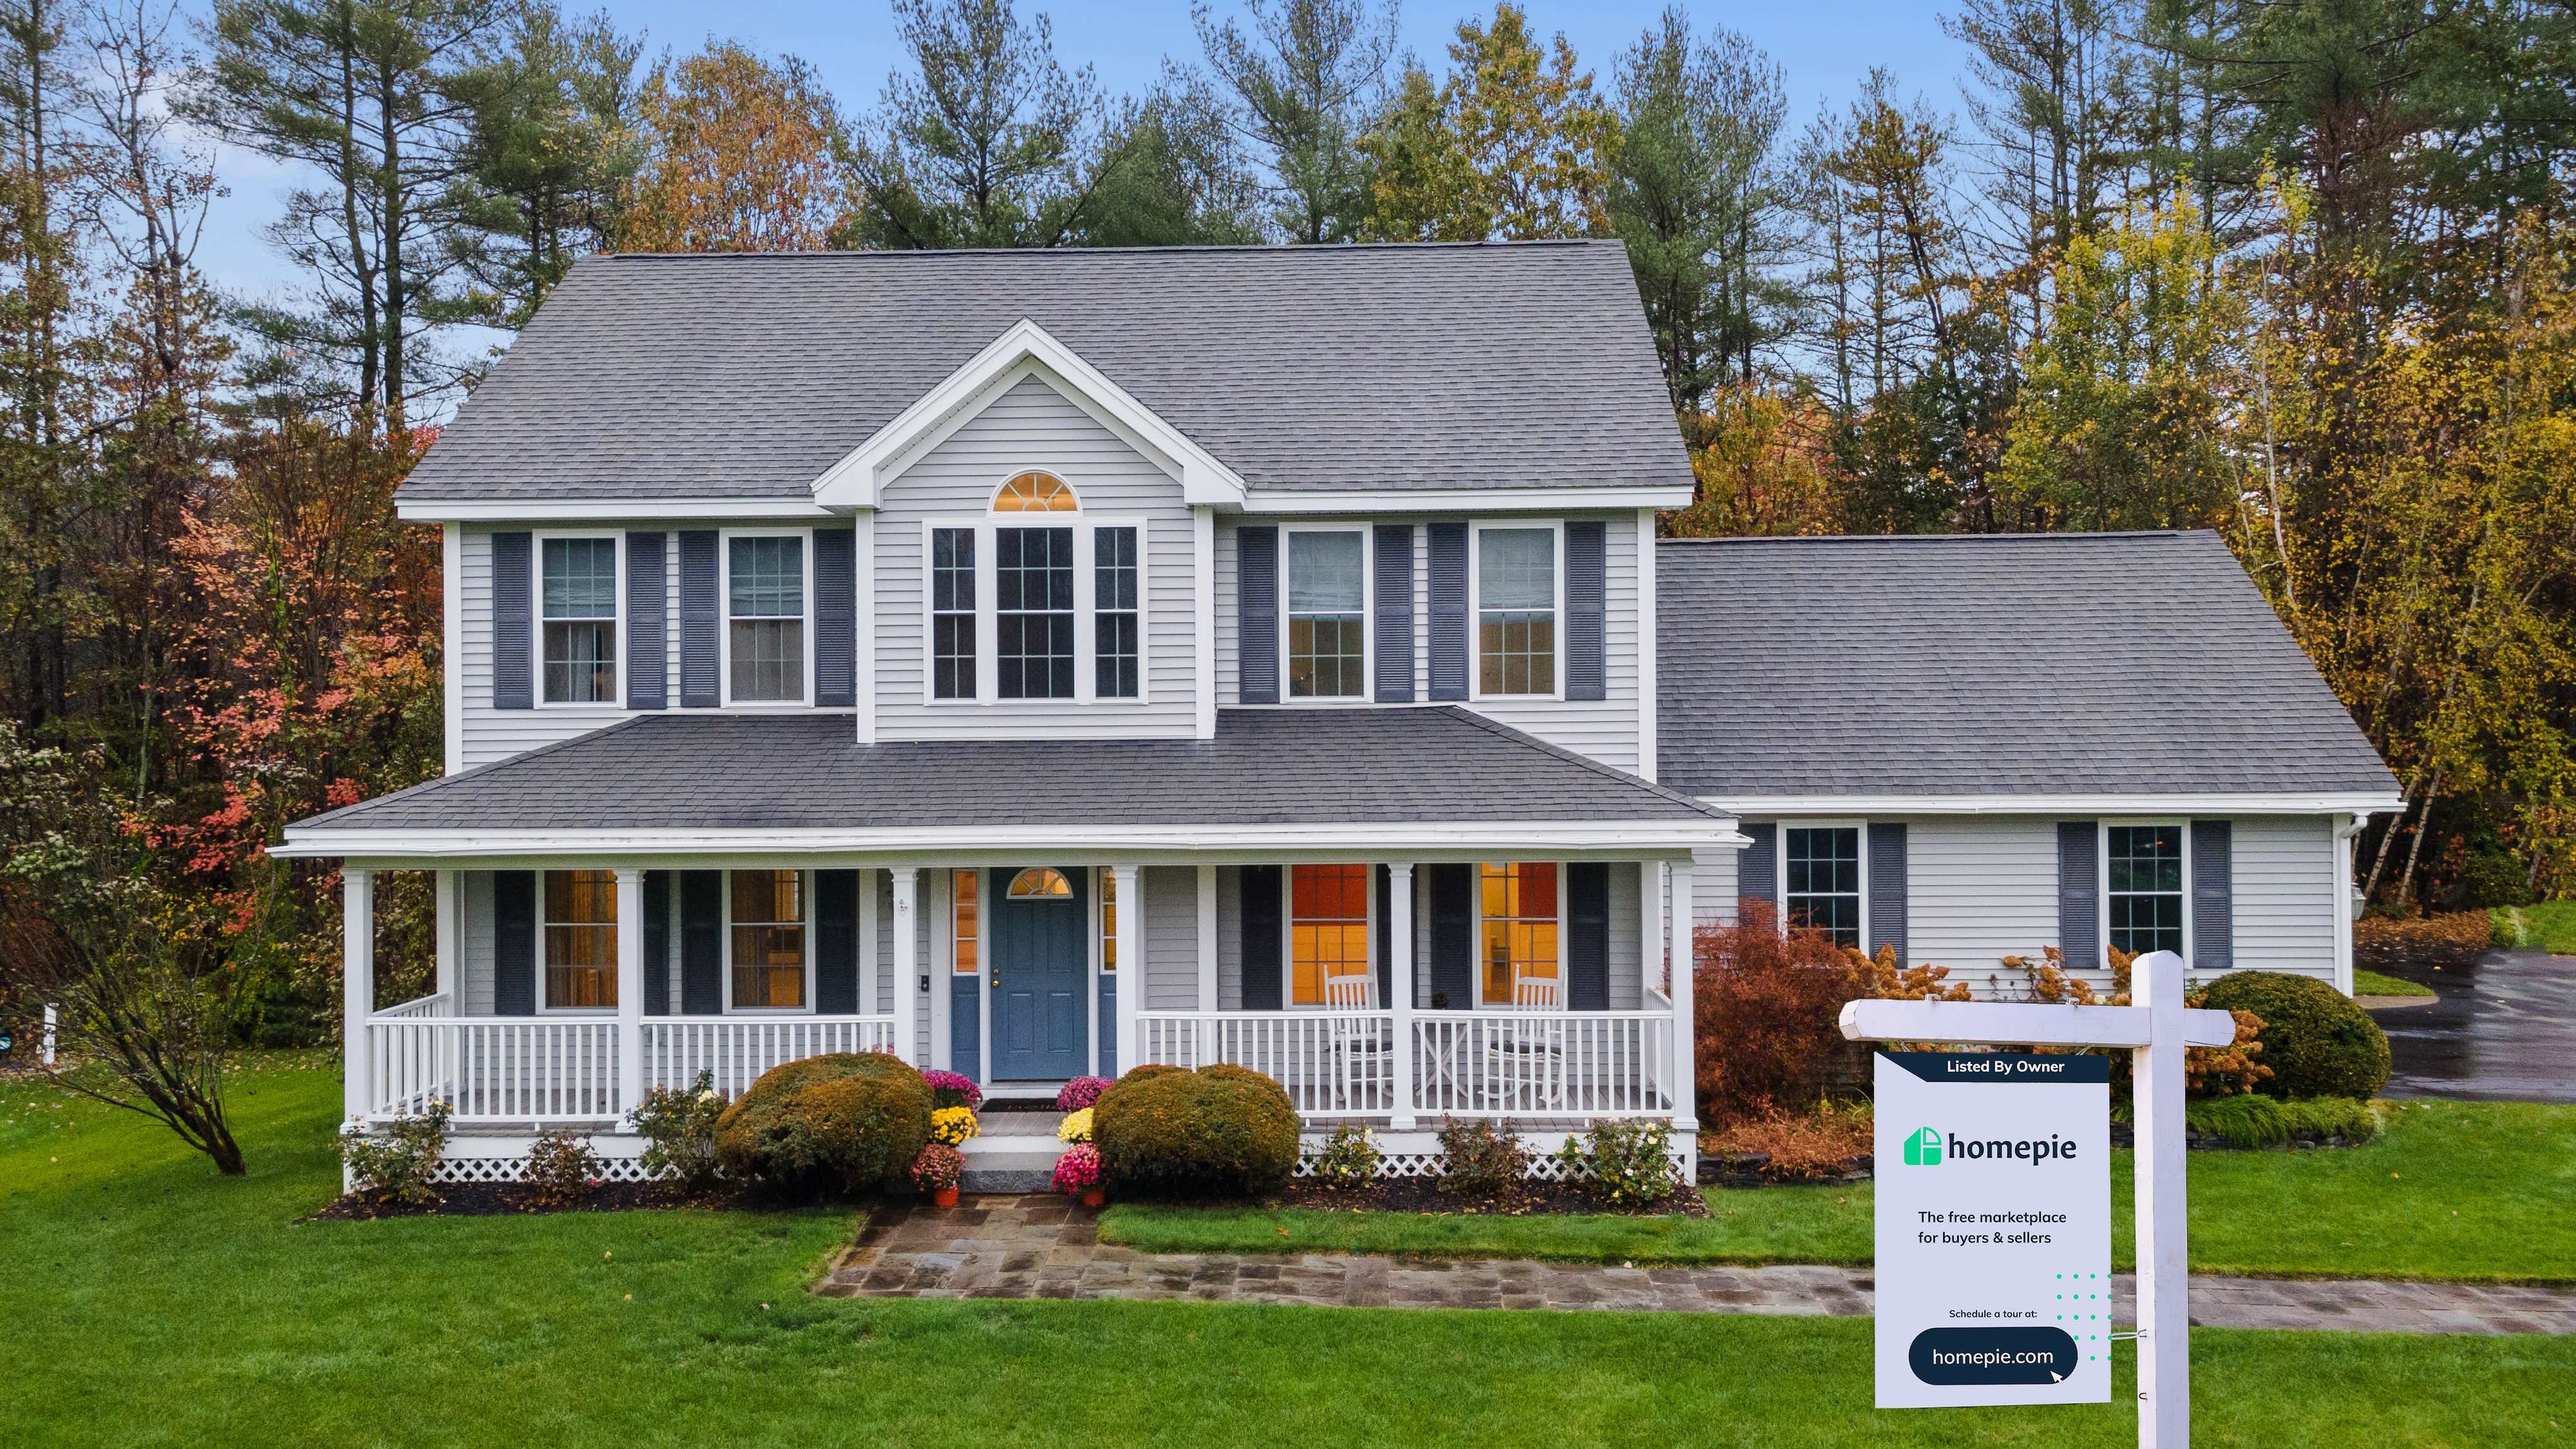 Homepie, the trailblazing proptech startup, is set to shake up the real estate landscape with the nationwide launch of its For Sale By Owner (FSBO) online marketplace.